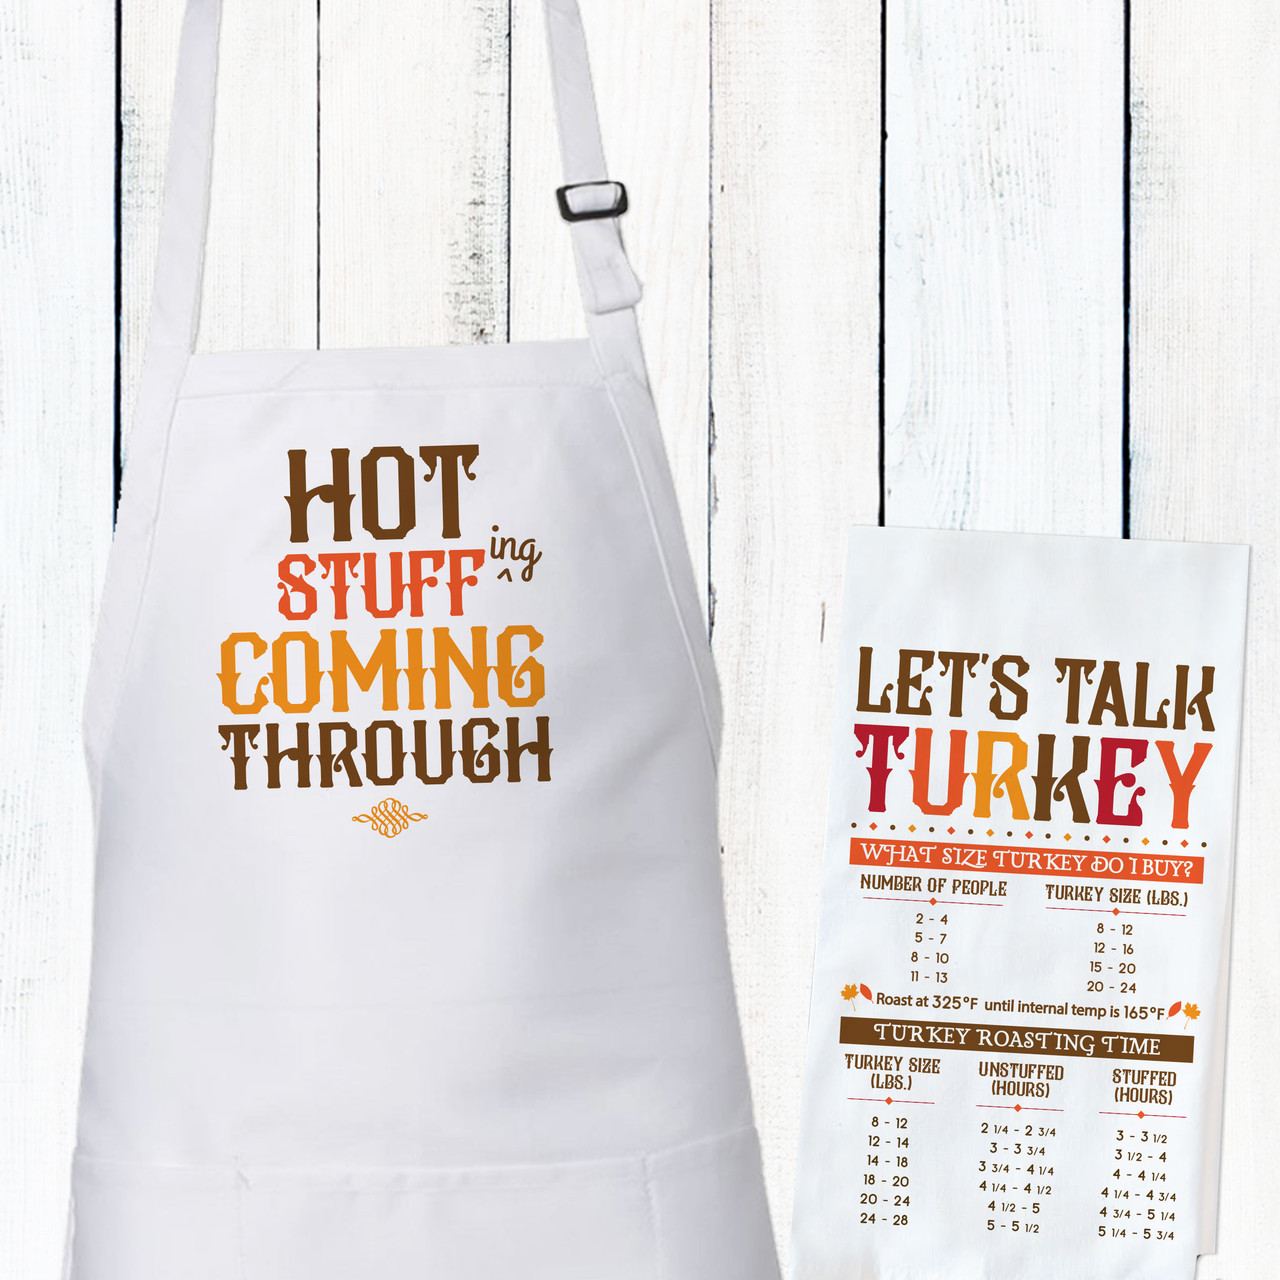 https://cdn11.bigcommerce.com/s-5grzuu6/images/stencil/1280x1280/products/2489/50380/Hot-Stuffing-Thanksgiving-Apron-and-Towel__65506.1681854623.jpg?c=2